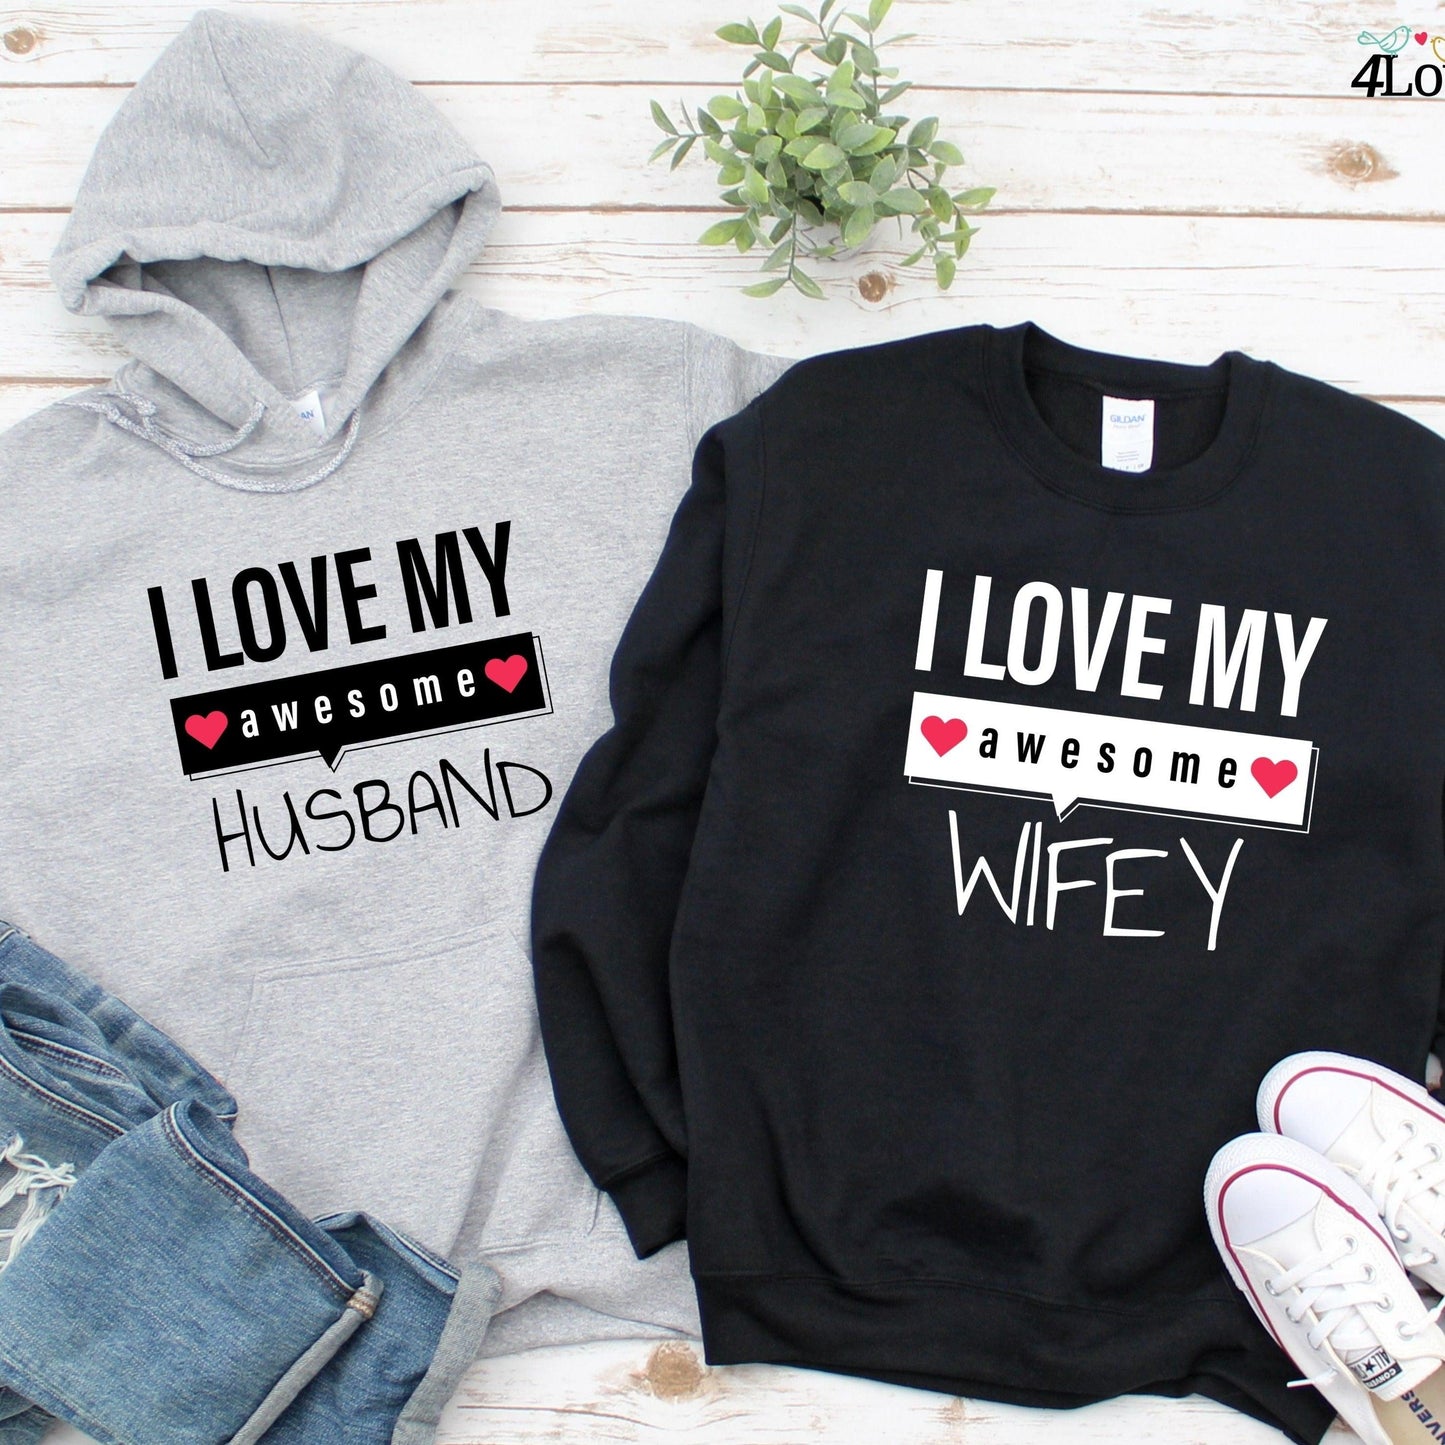 Matching Set: I Love My Awesome Husband/Wifey, Lovers Outfit, Gift for Couples, Valentine's Gift - 4Lovebirds